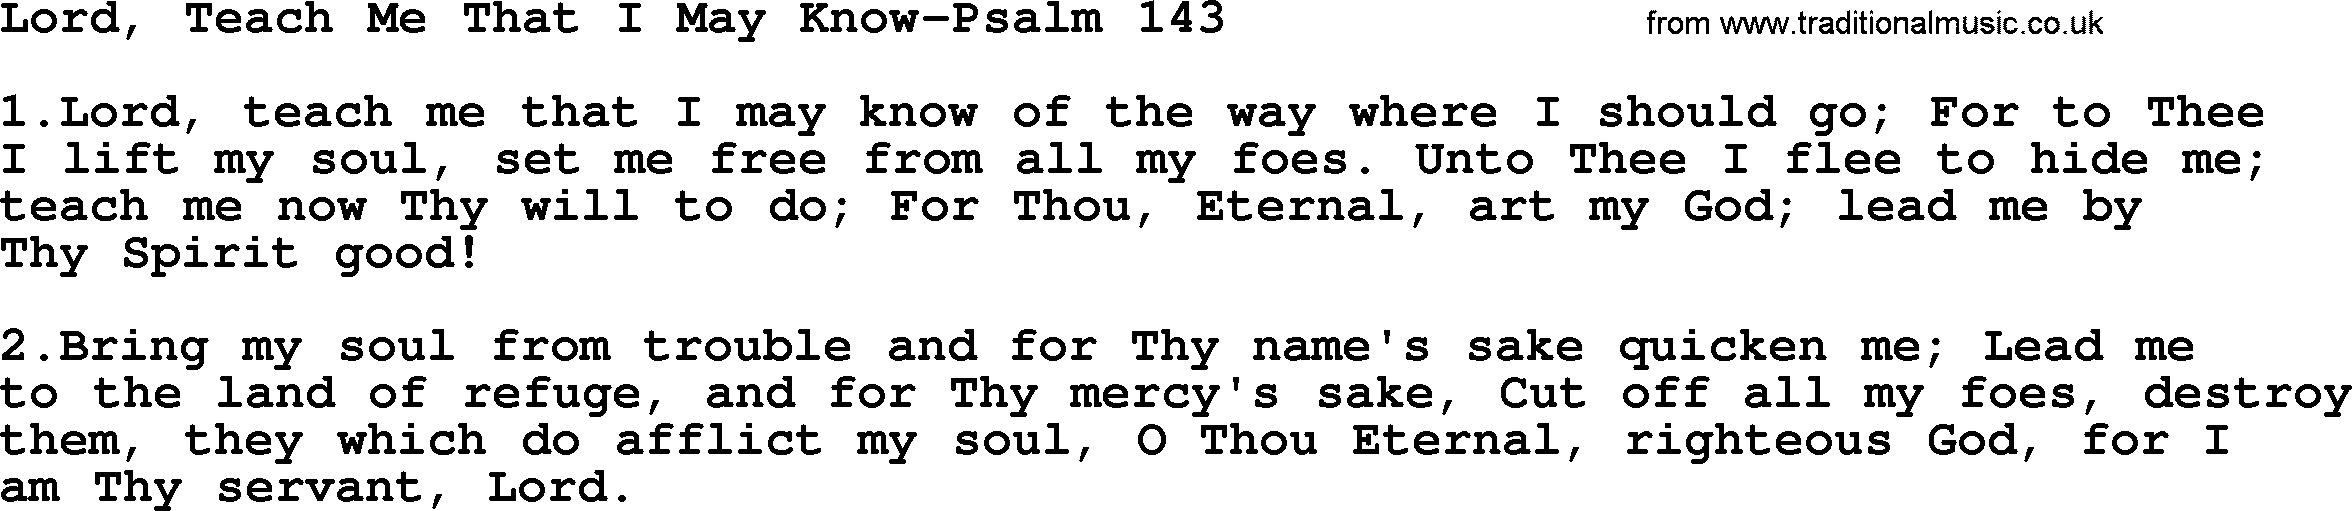 Hymns from the Psalms, Hymn: Lord, Teach Me That I May Know-Psalm 143, lyrics with PDF